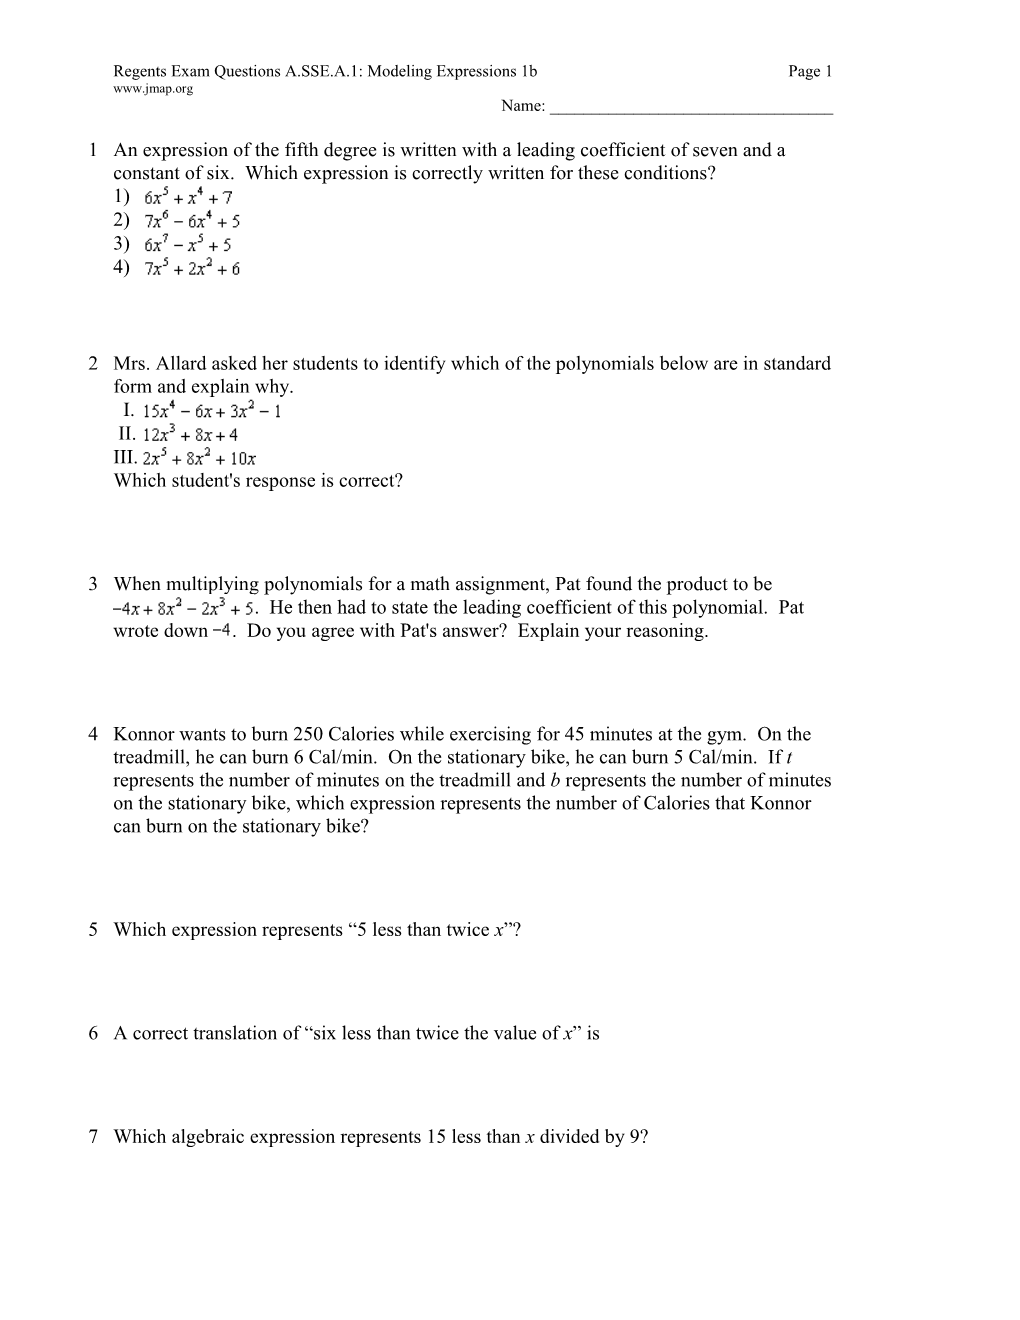 Regents Exam Questions A.SSE.A.1: Modeling Expressions 1Bpage 1